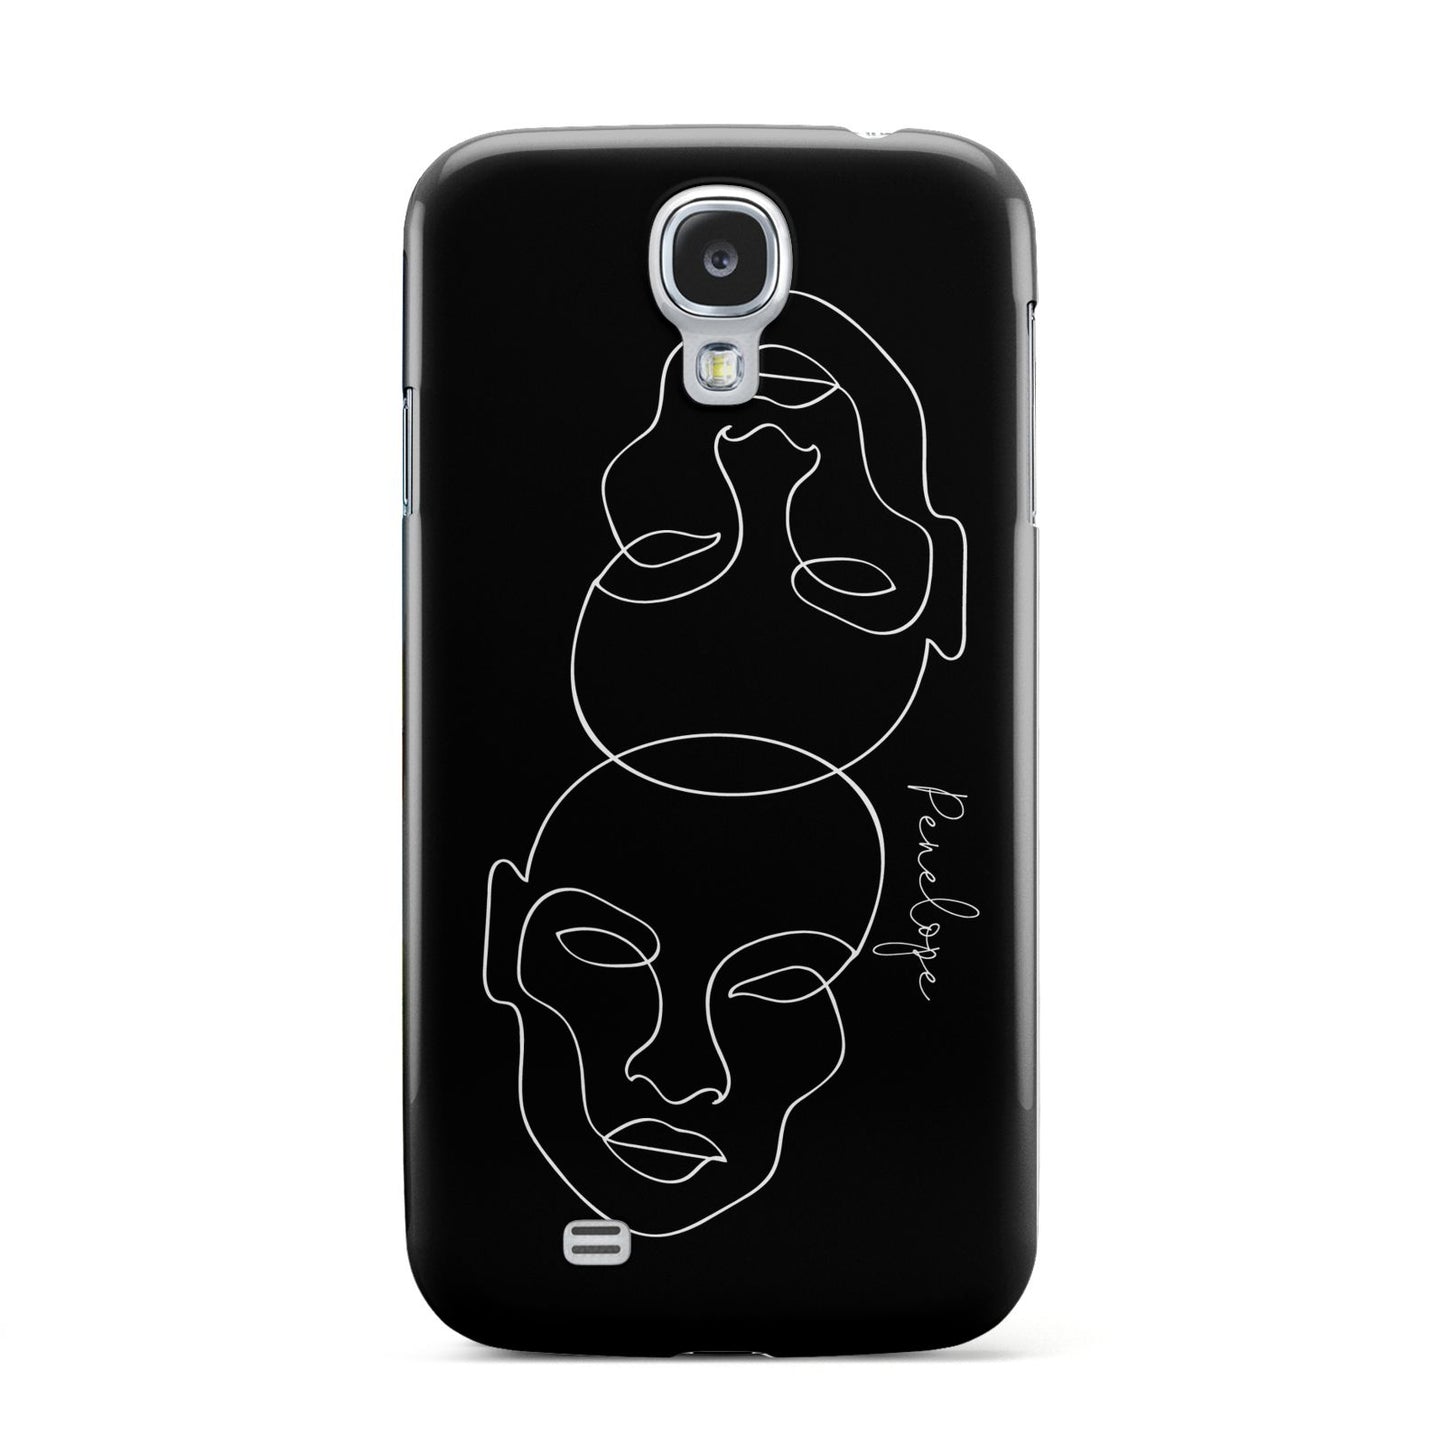 Personalised Abstract Line Art Samsung Galaxy S4 Case